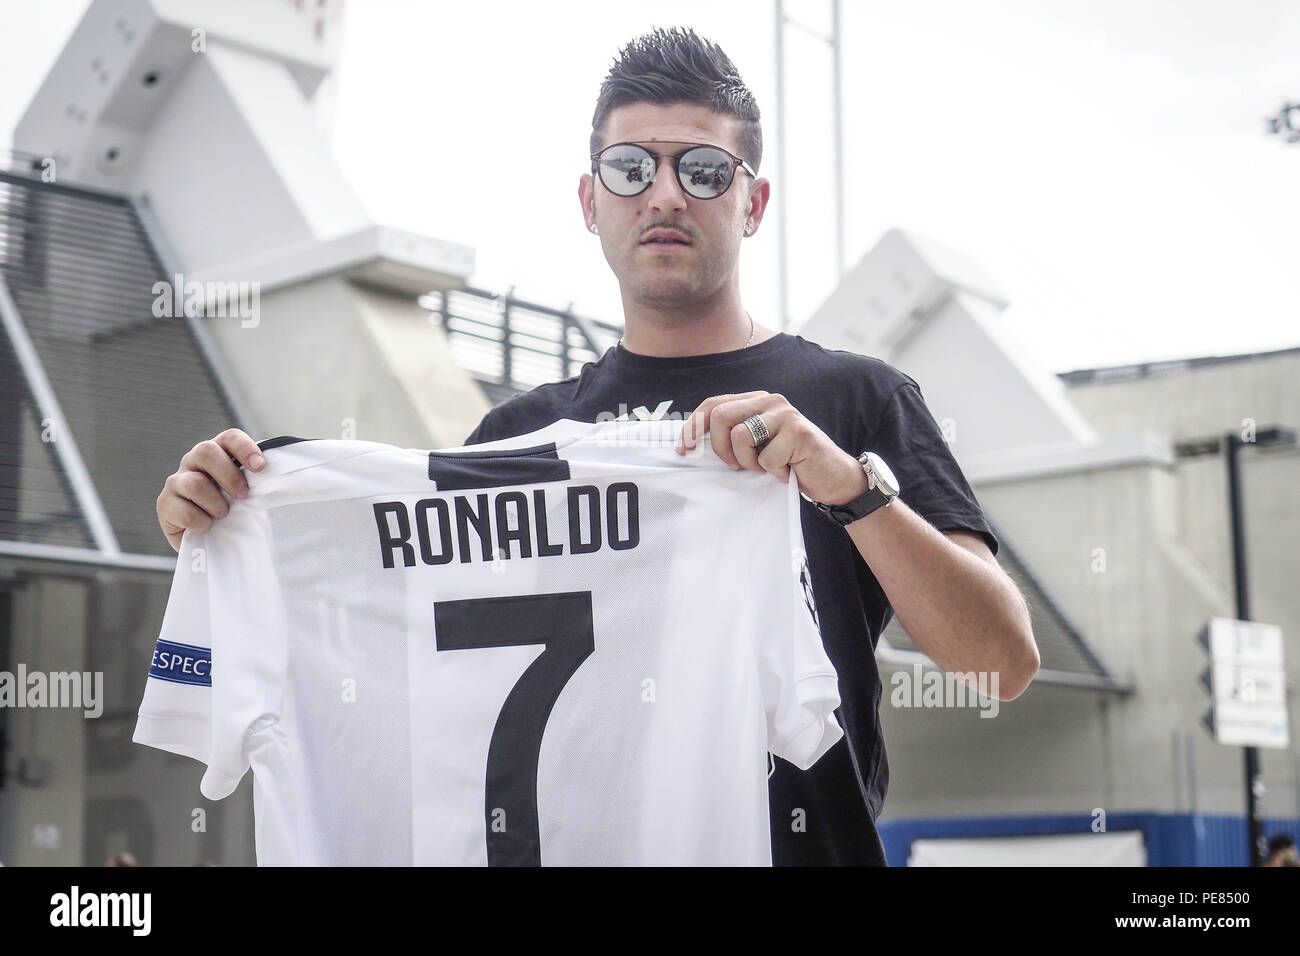 Juventus supporters with Cristiano Ronaldo's shirt at the Allianz Stadium  Where: Turin, Italy When: 12 Jul 2018 Credit: IPA/WENN.com **Only available  for publication in UK, USA, Germany, Austria, Switzerland** Stock Photo -